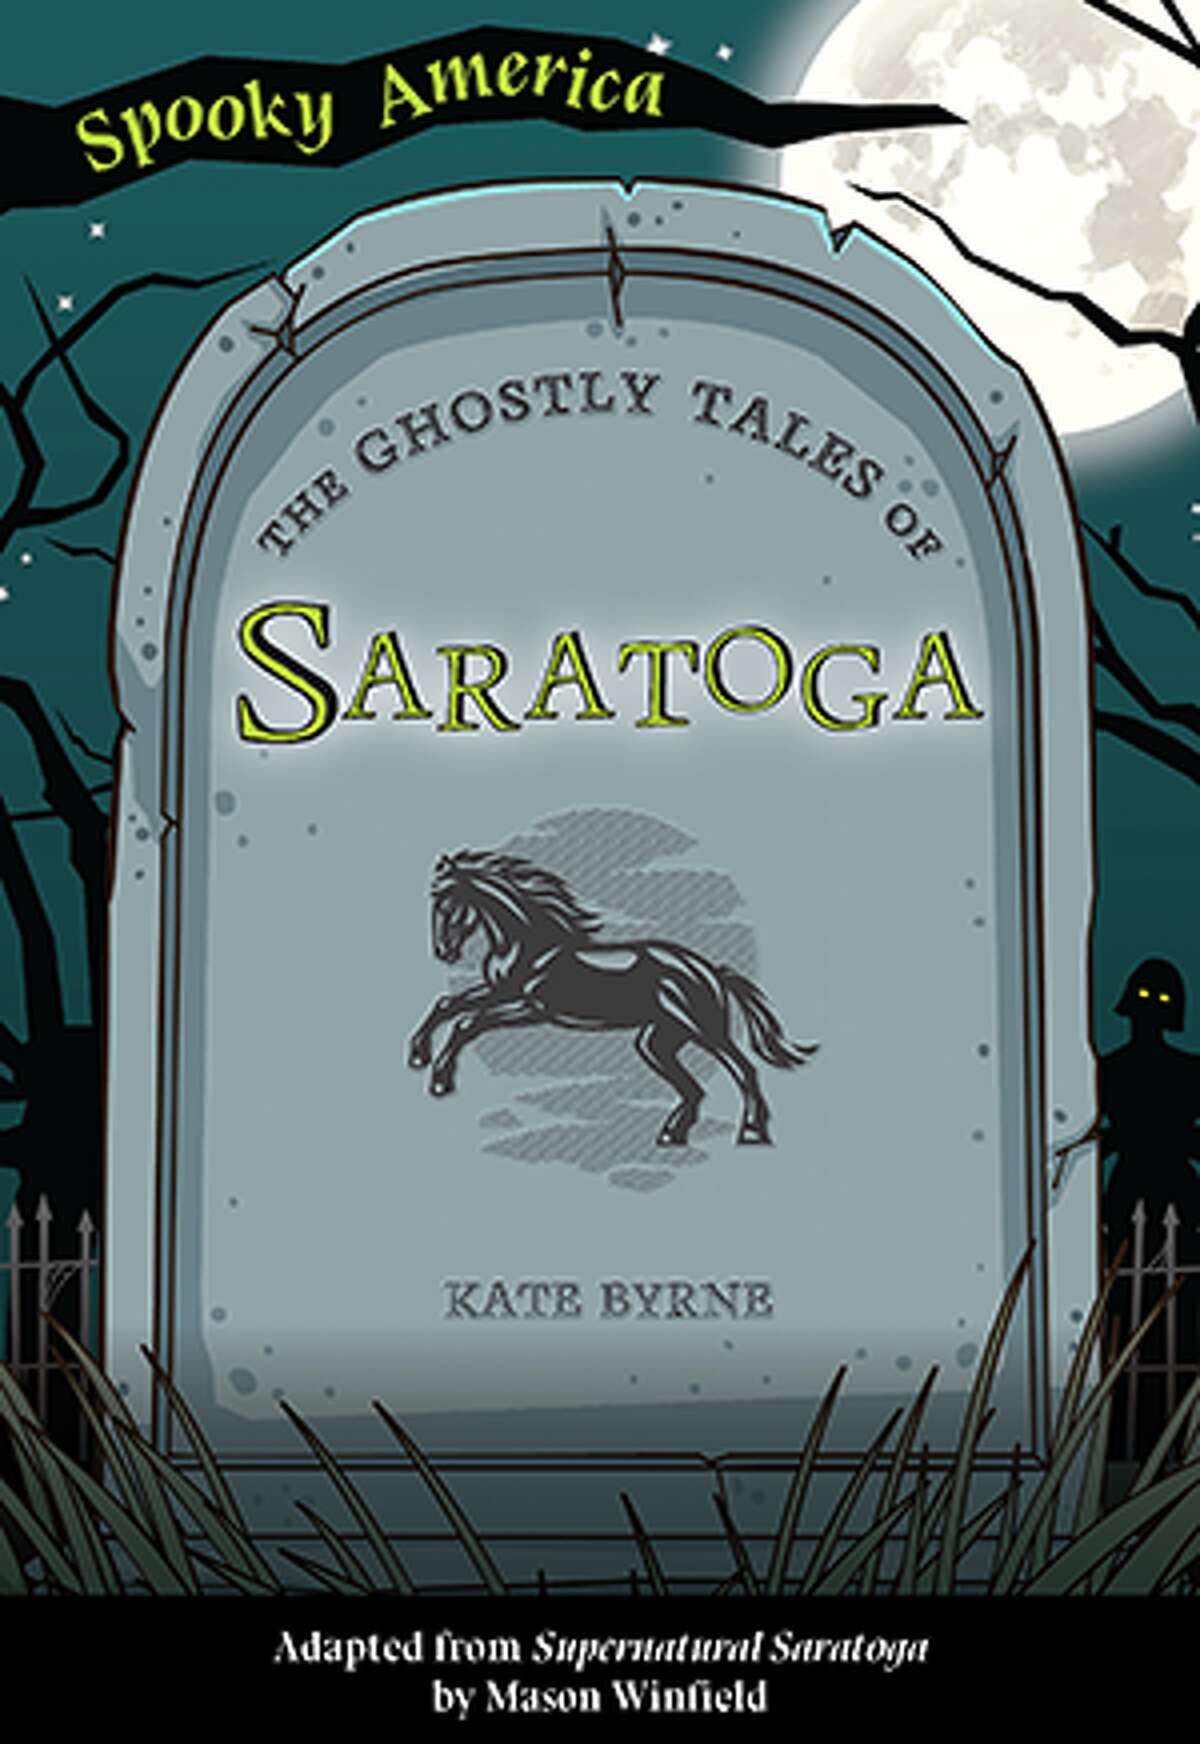 "The Ghostly Tales of Saratoga," by Kate Byrne is a collection of scary stories in Saratoga locations, published by Arcadia Publishing.